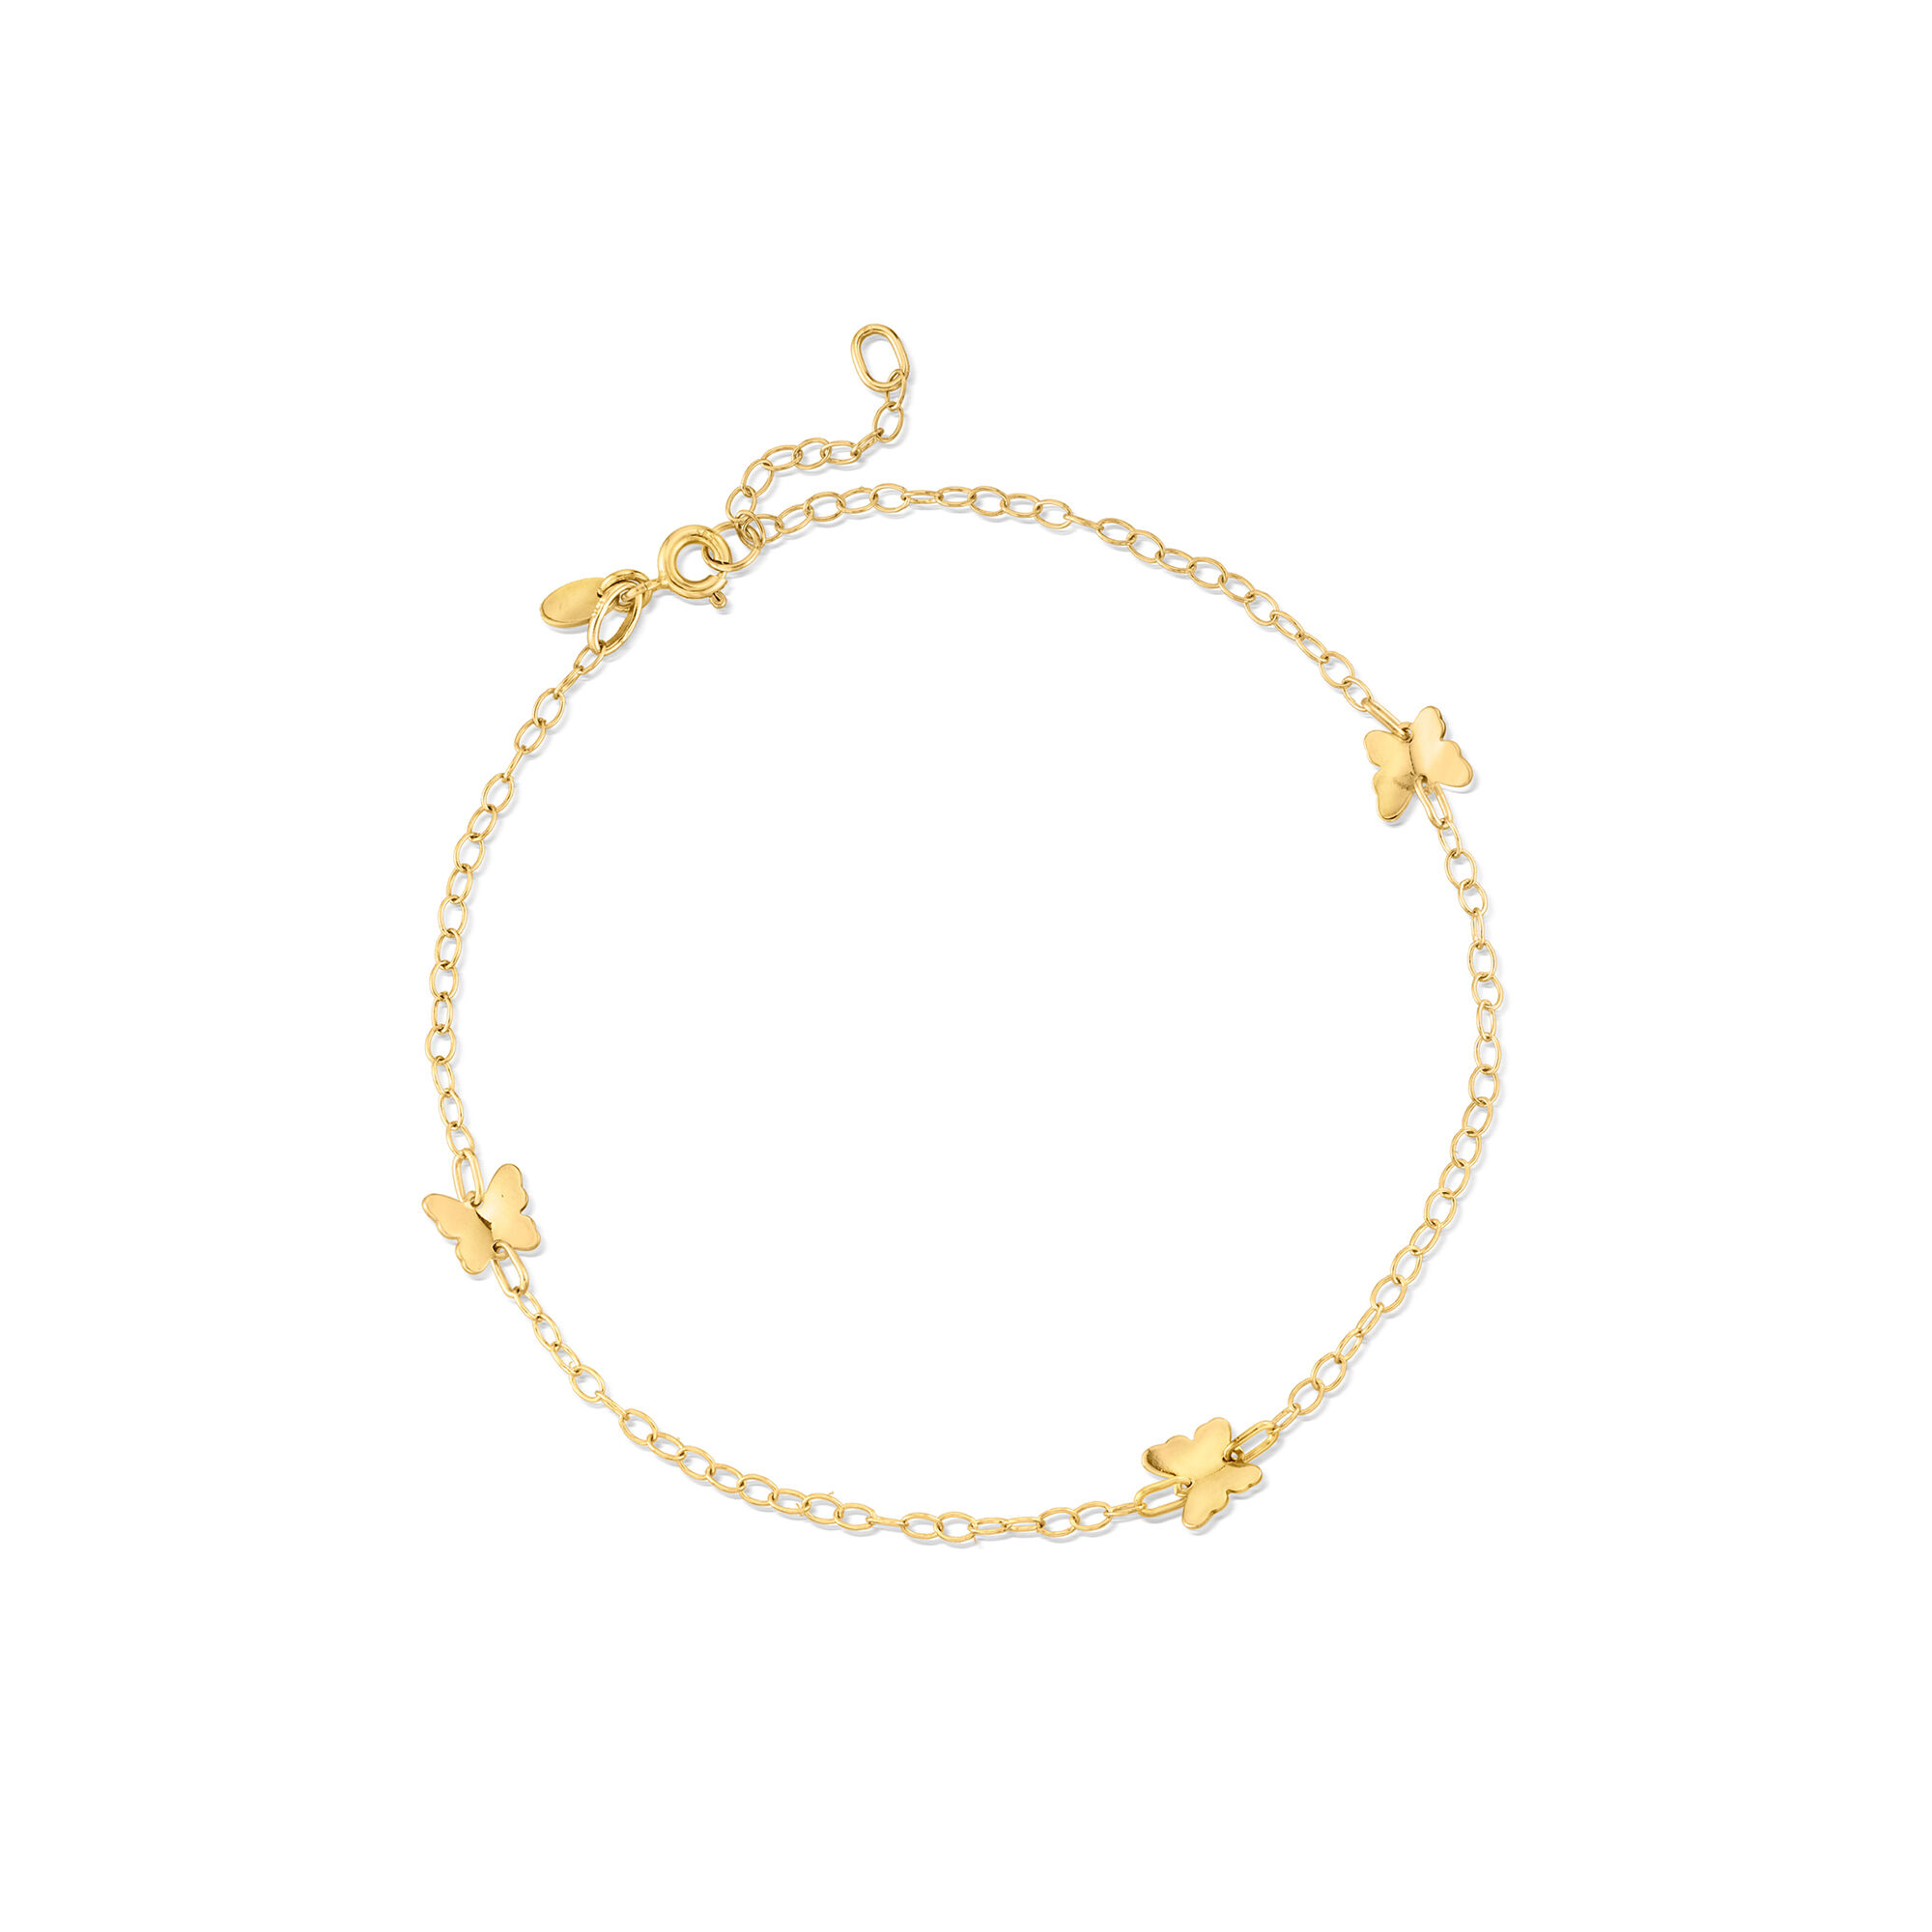 Italian 14kt Yellow Gold Butterfly Station Anklet. 9